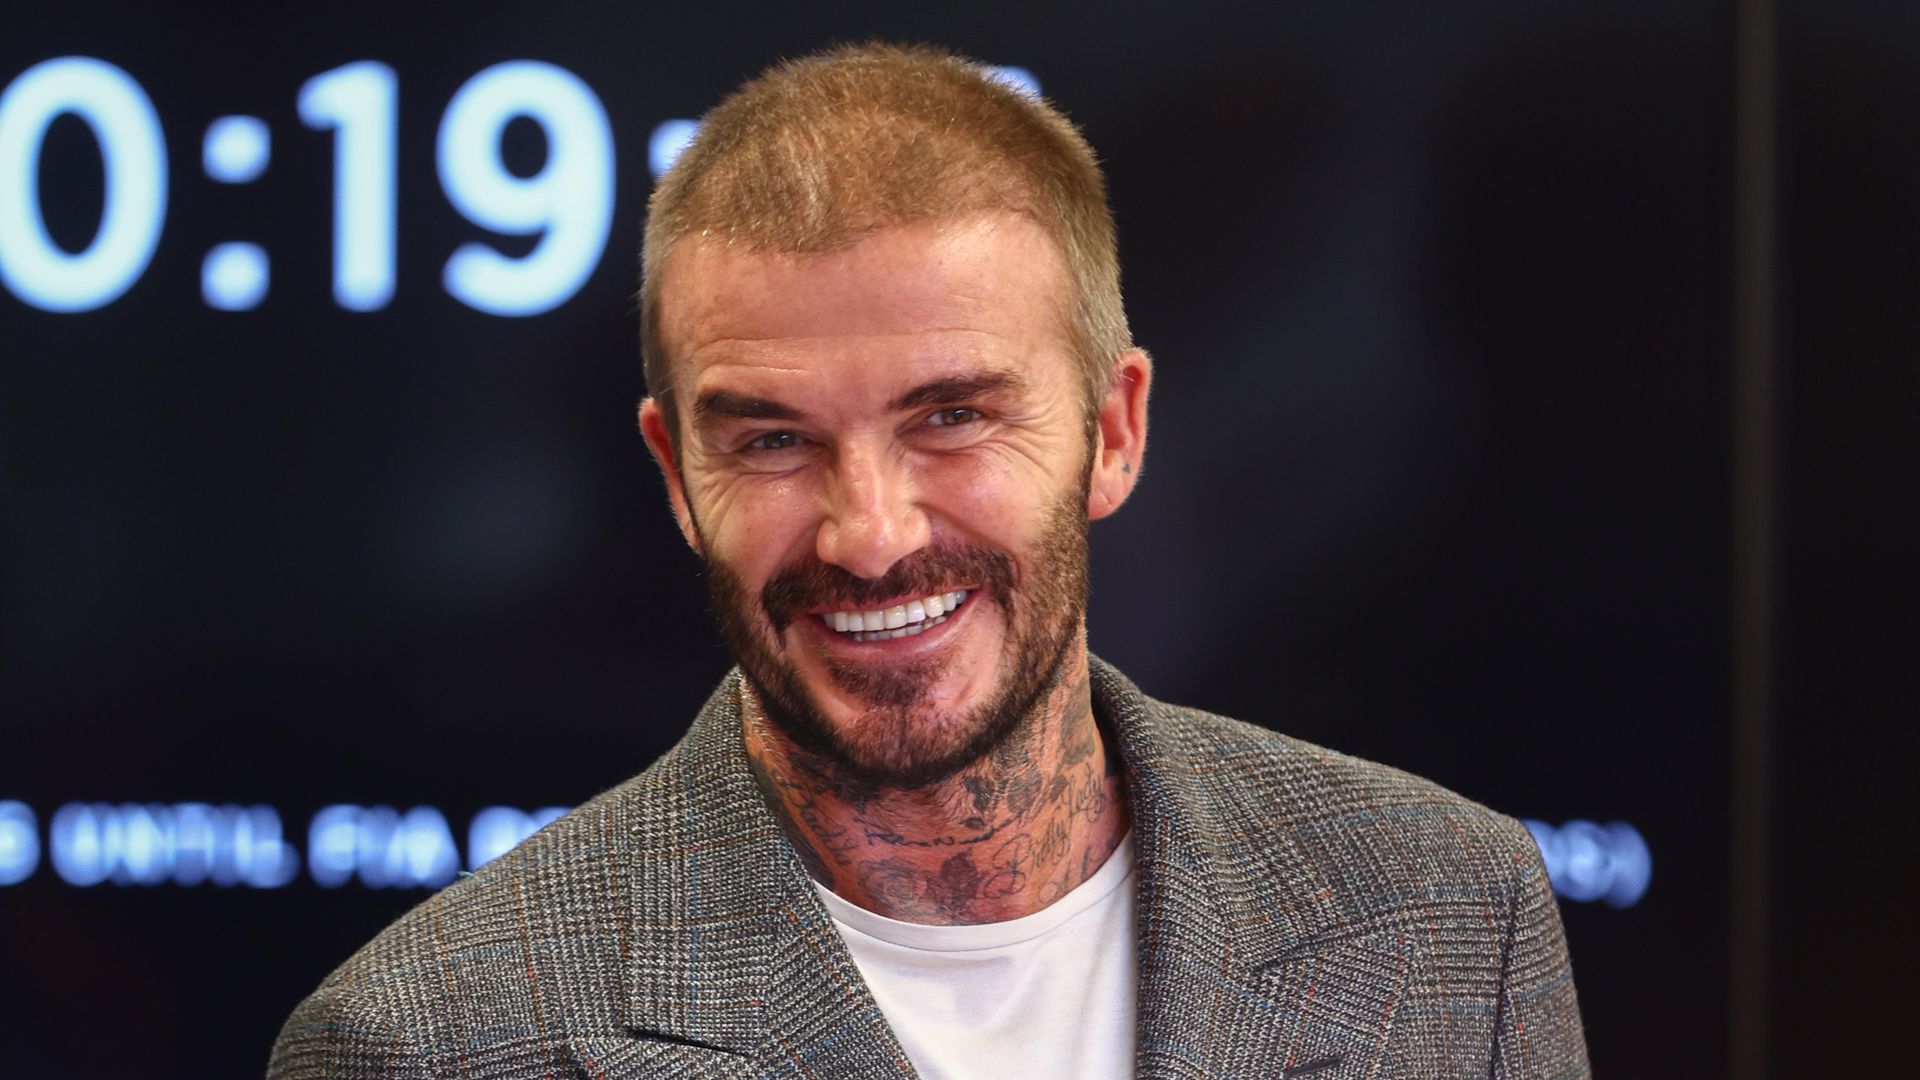 Beiruting - Life Style Blog - David Beckham stops at McDonald's for Big Mac  & poses for selfie with a fan